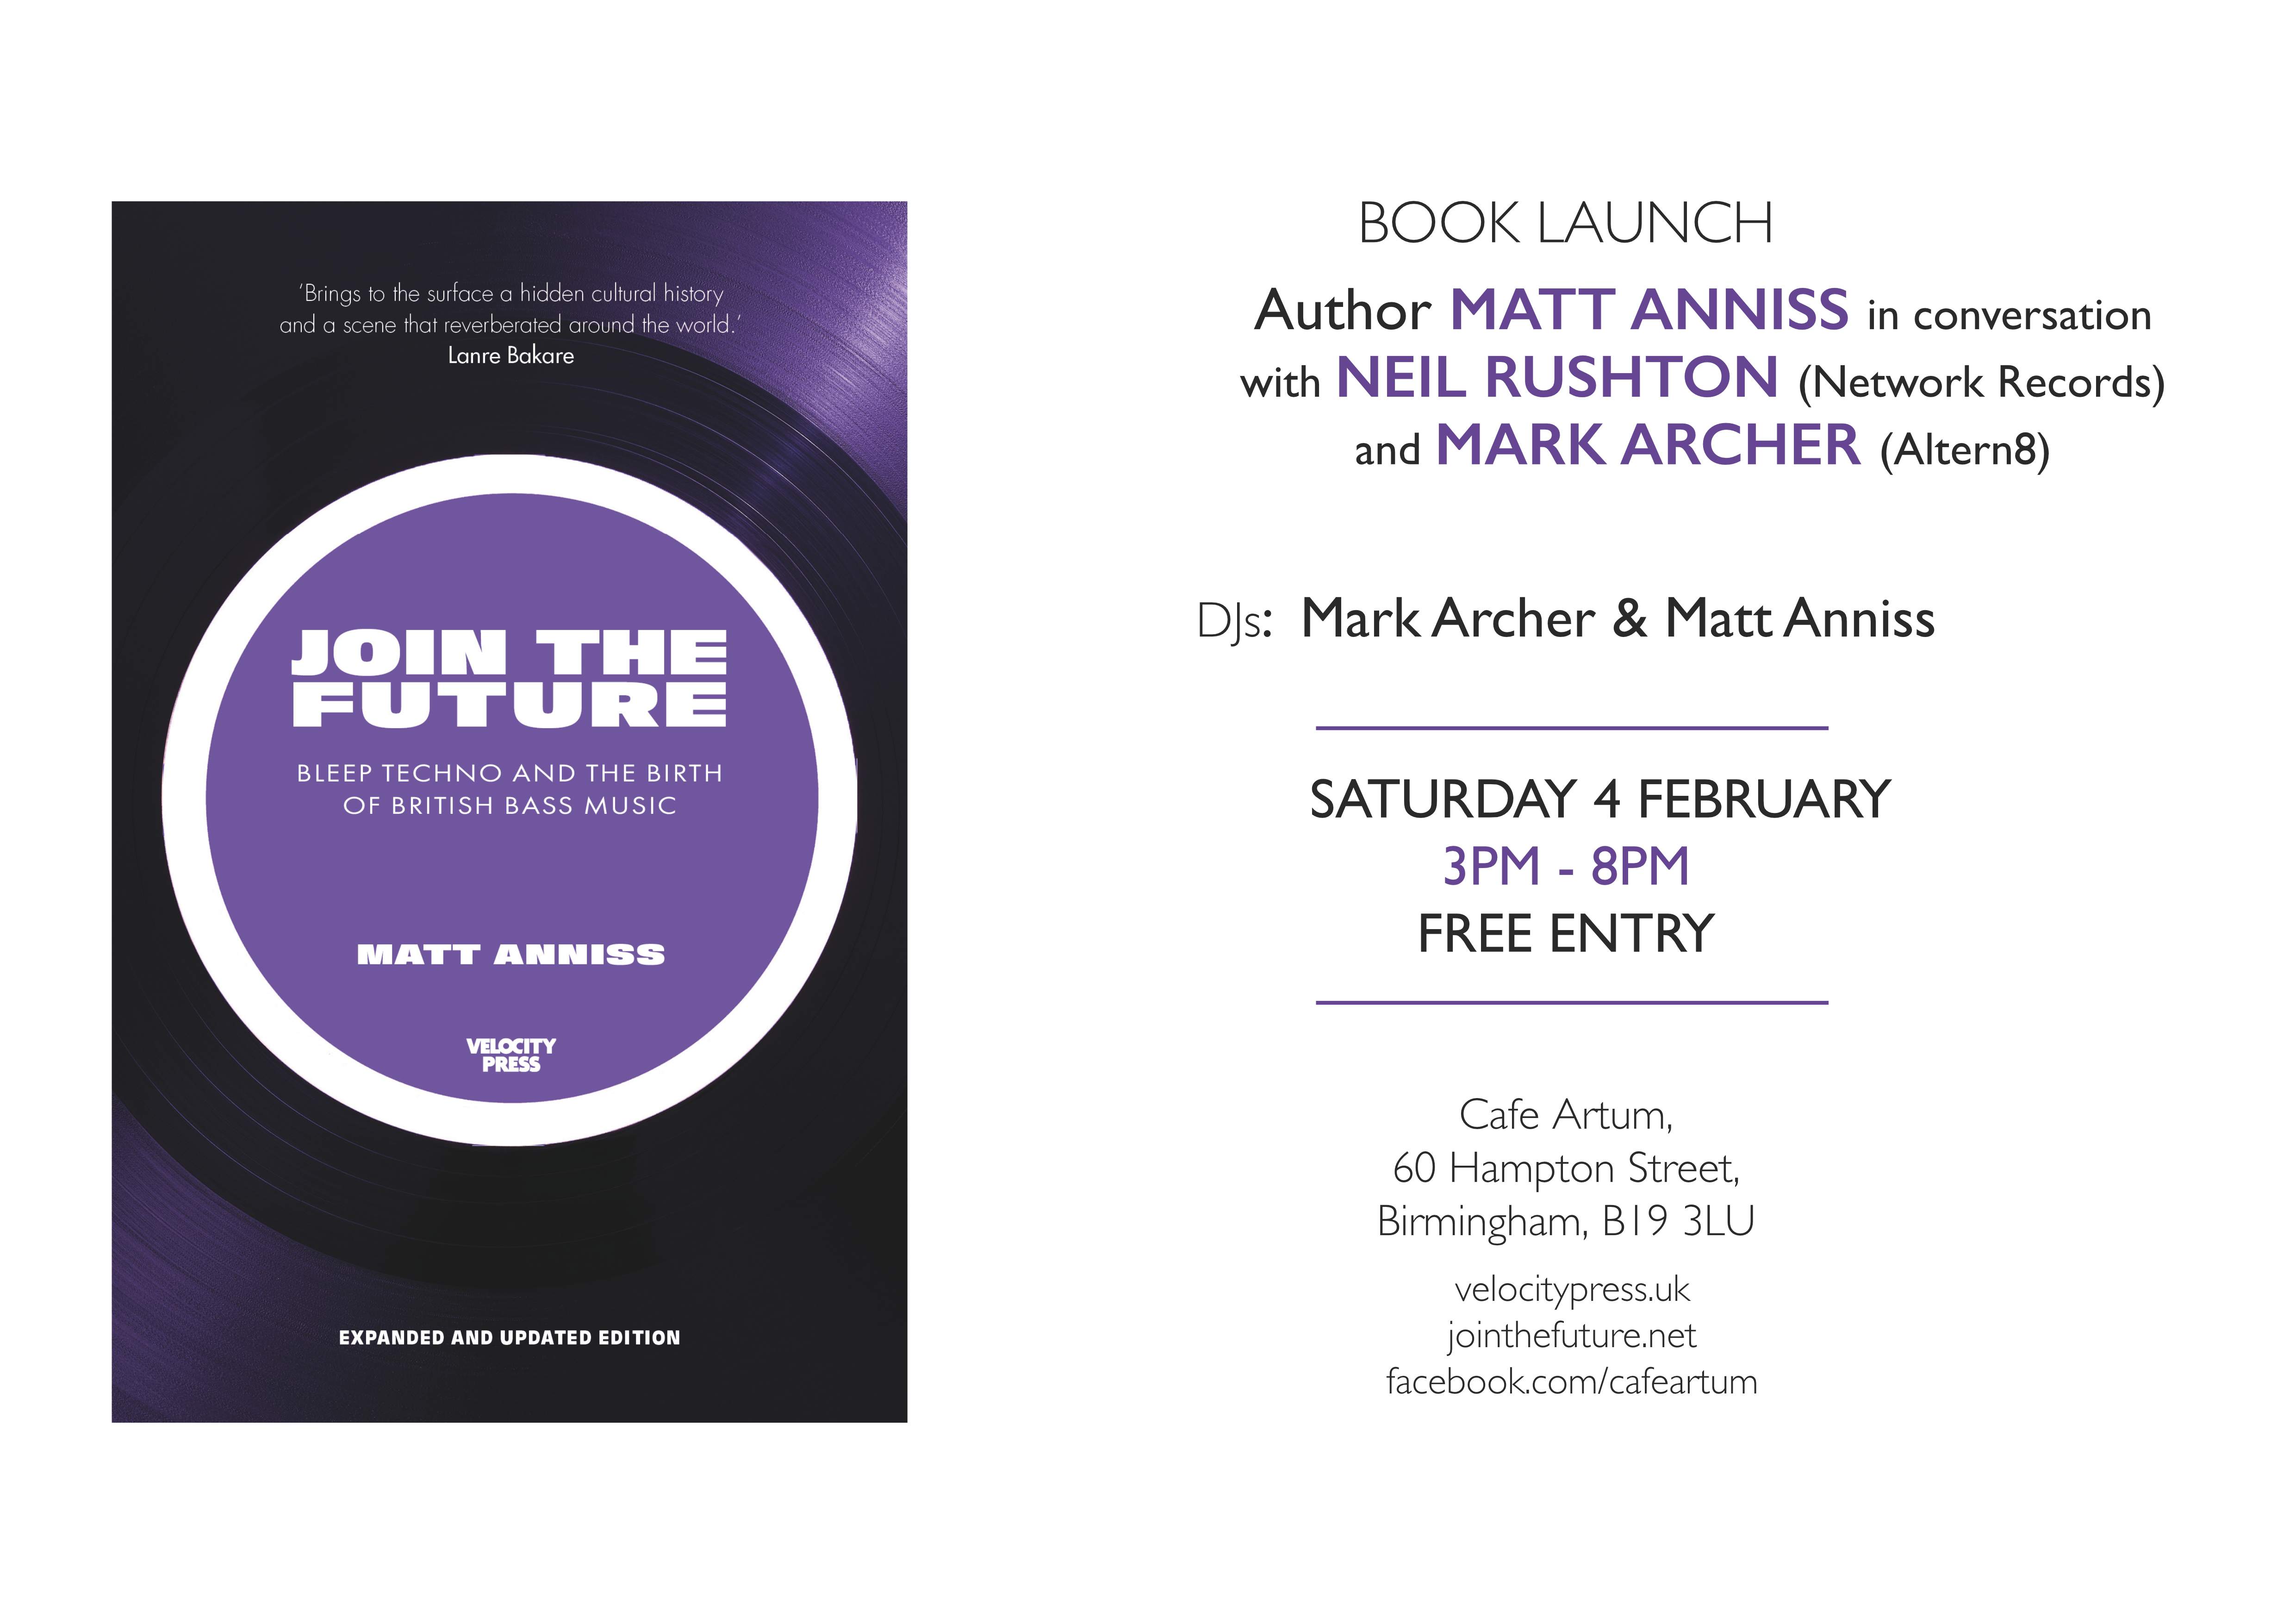 'Join The Future' Book (Re-)Launch - フライヤー表